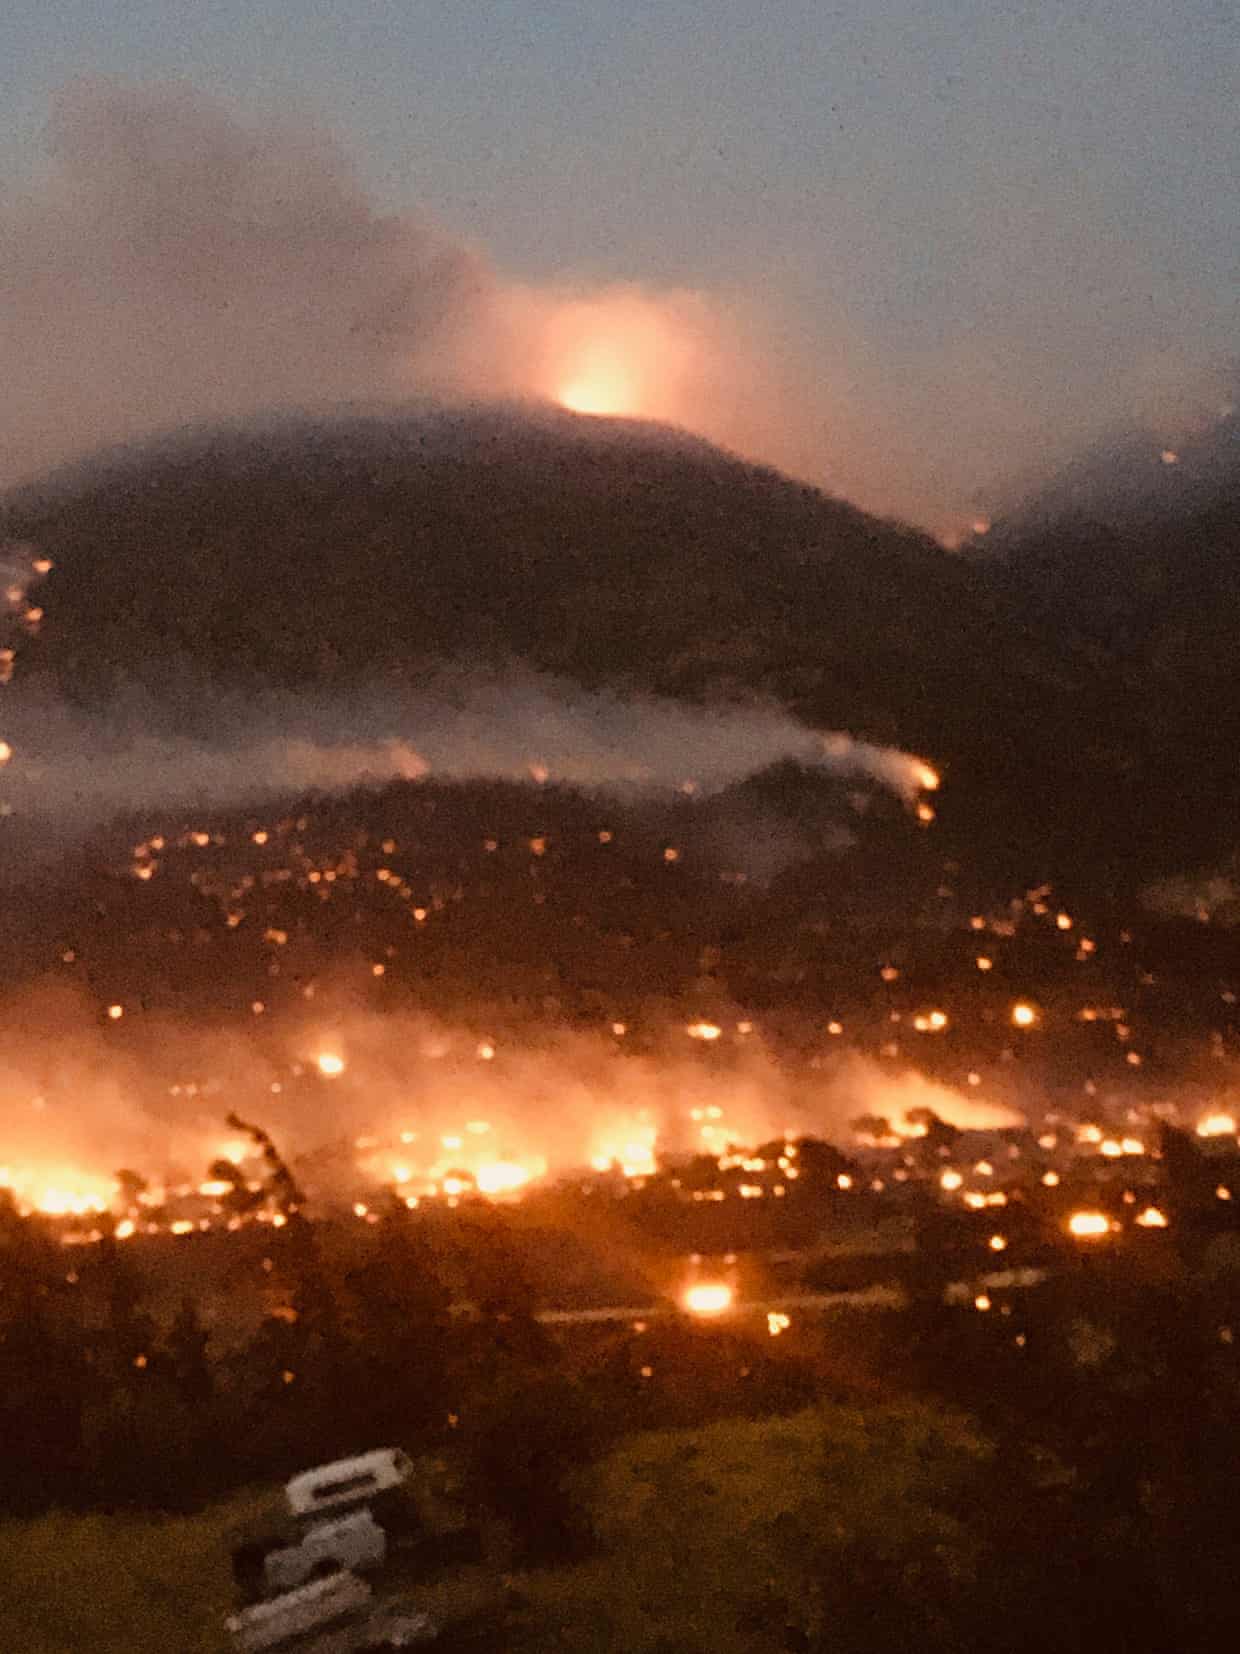 Wildfires consume the town of Lytton, British Columbia, on 30 June 2021. Photo: Jack Zimmerman / The Guardian